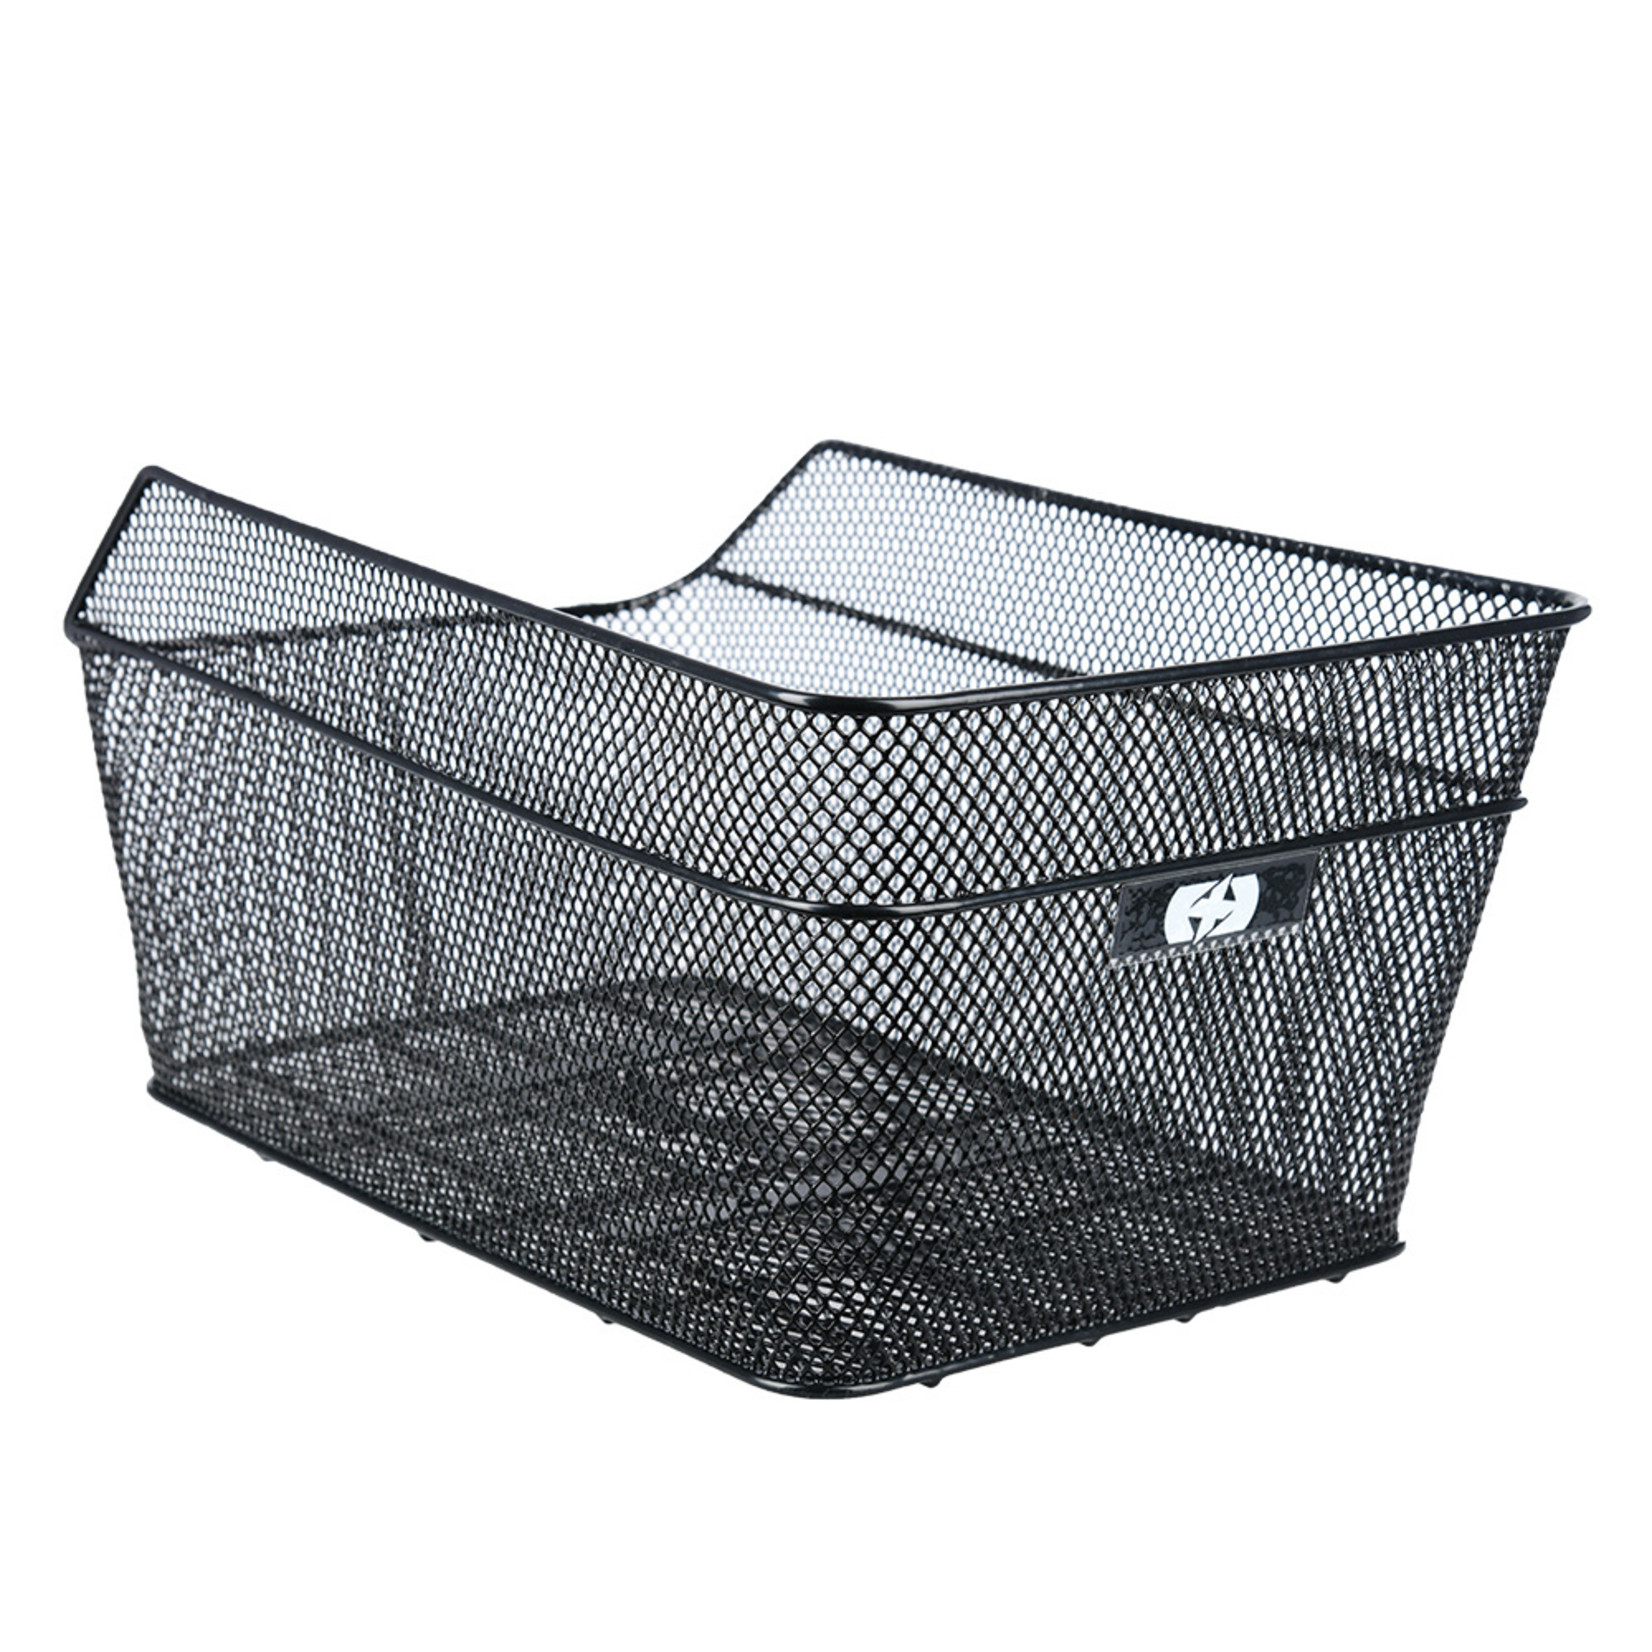 Oxford Oxford Wire Rear Basket with fittings - Black